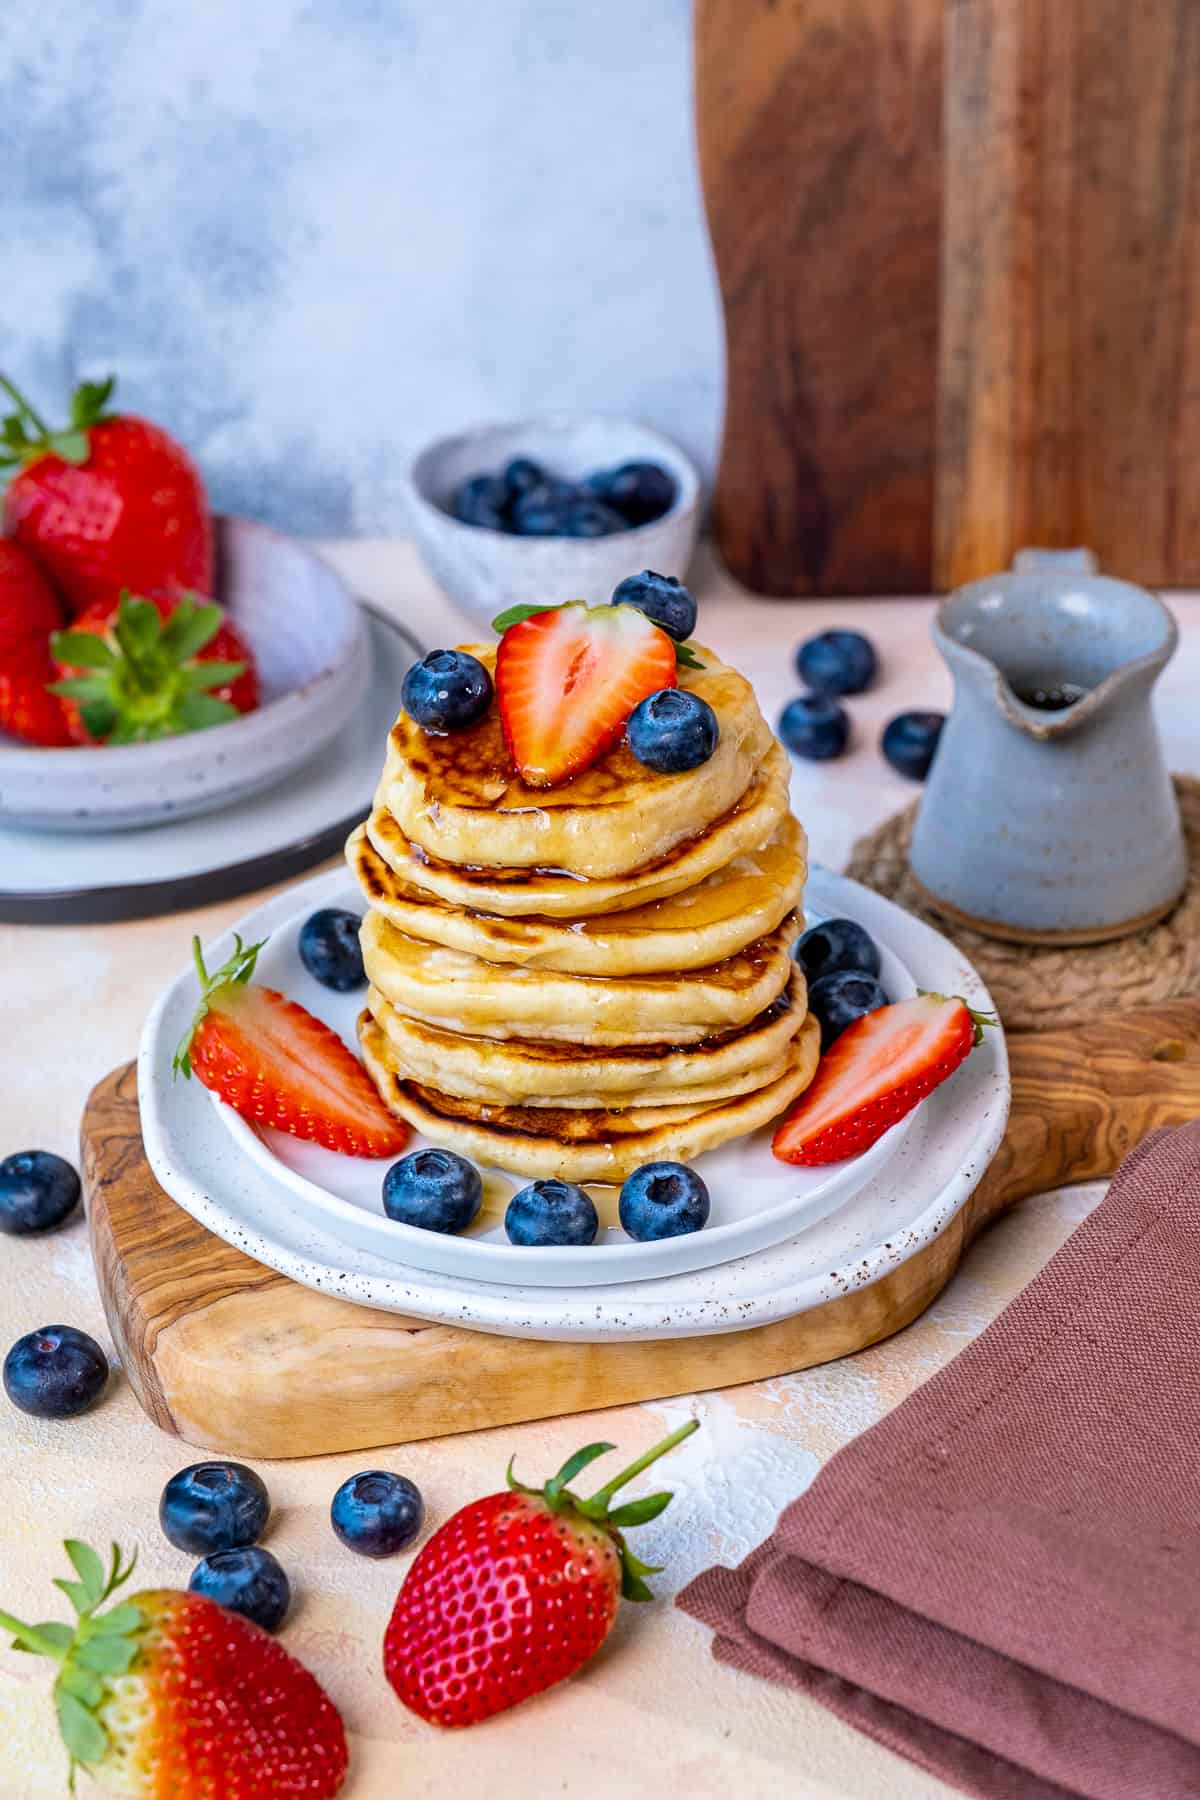 A stack of pancakes served with blueberries and strawberries on a white plate. A small ceramic maple syrup jug and more berries behind them.